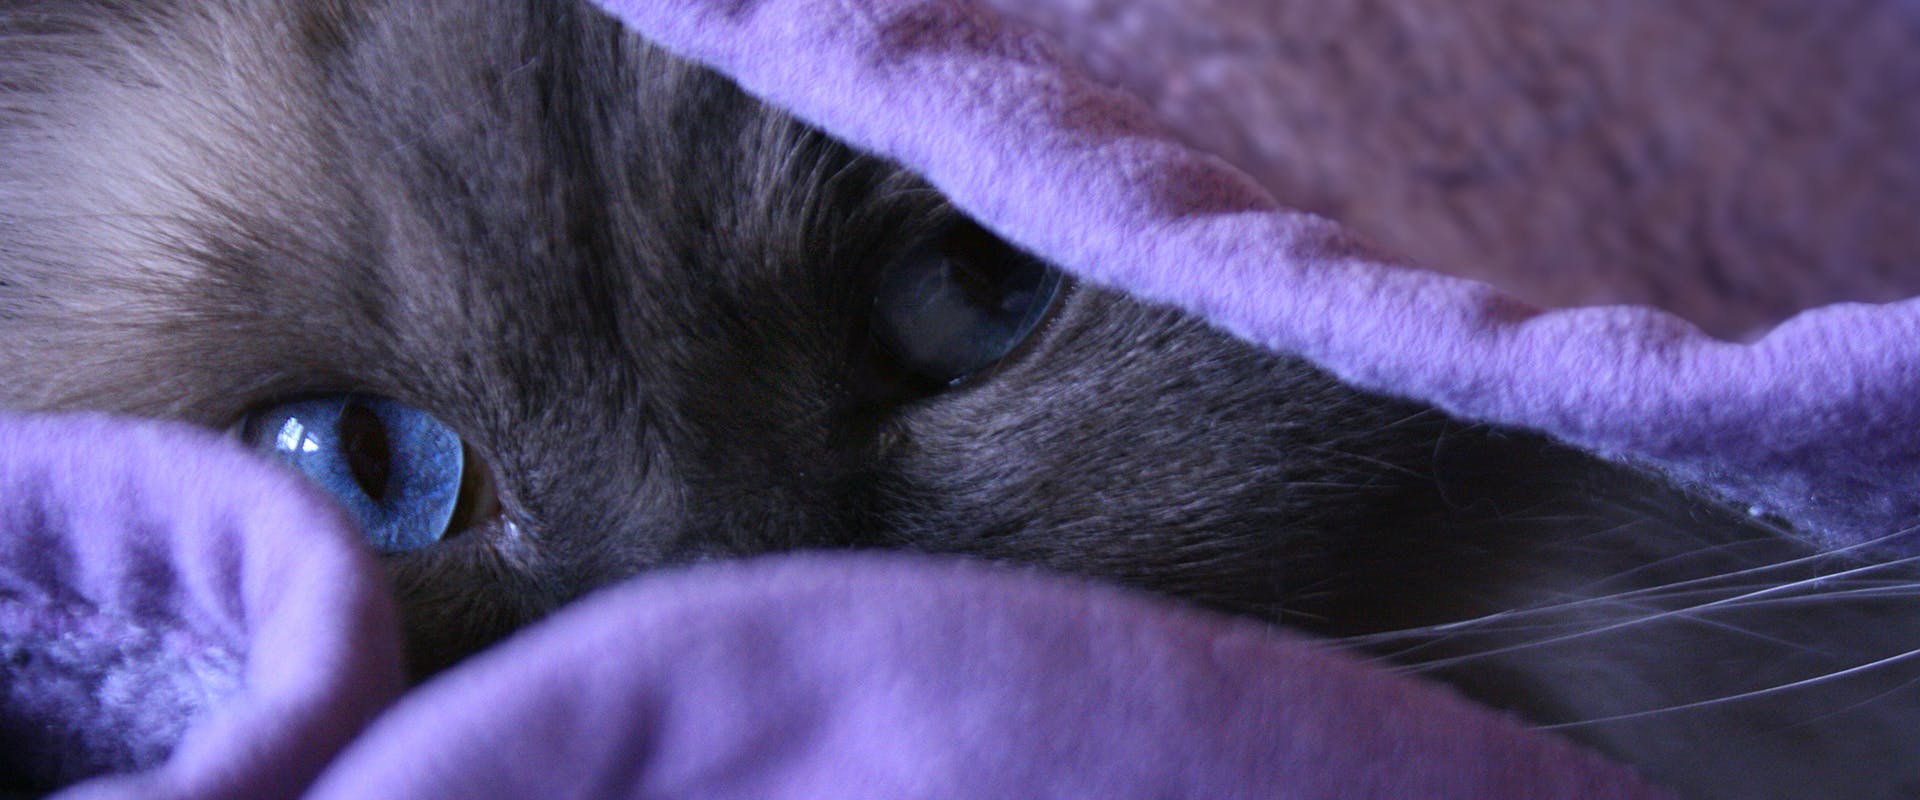 A mystical cat peering from underneath a pile of purple blankets